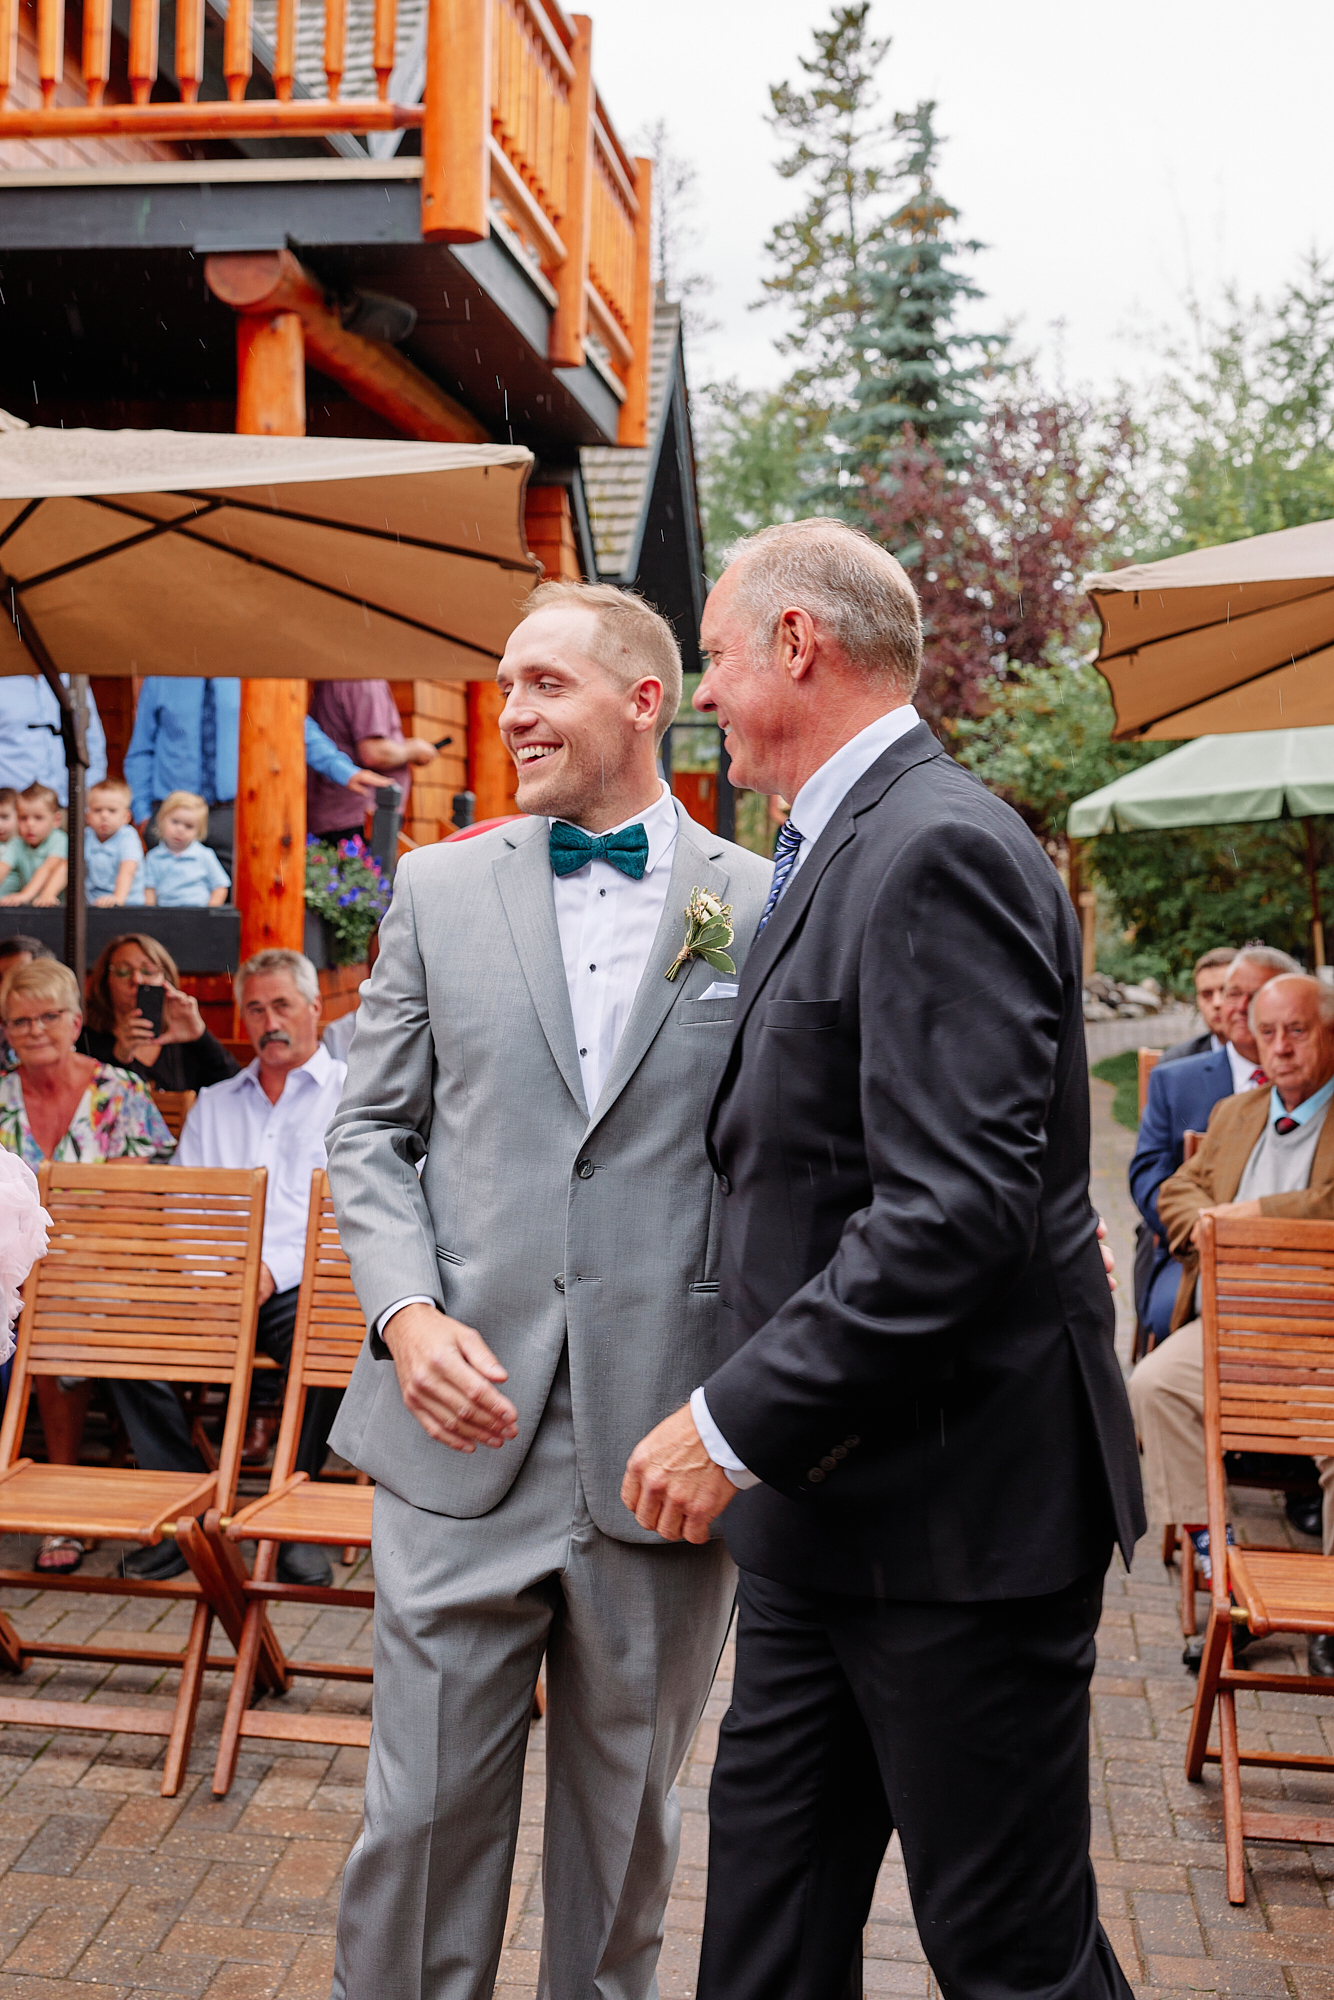 Bear and Bison Wedding in Canmore